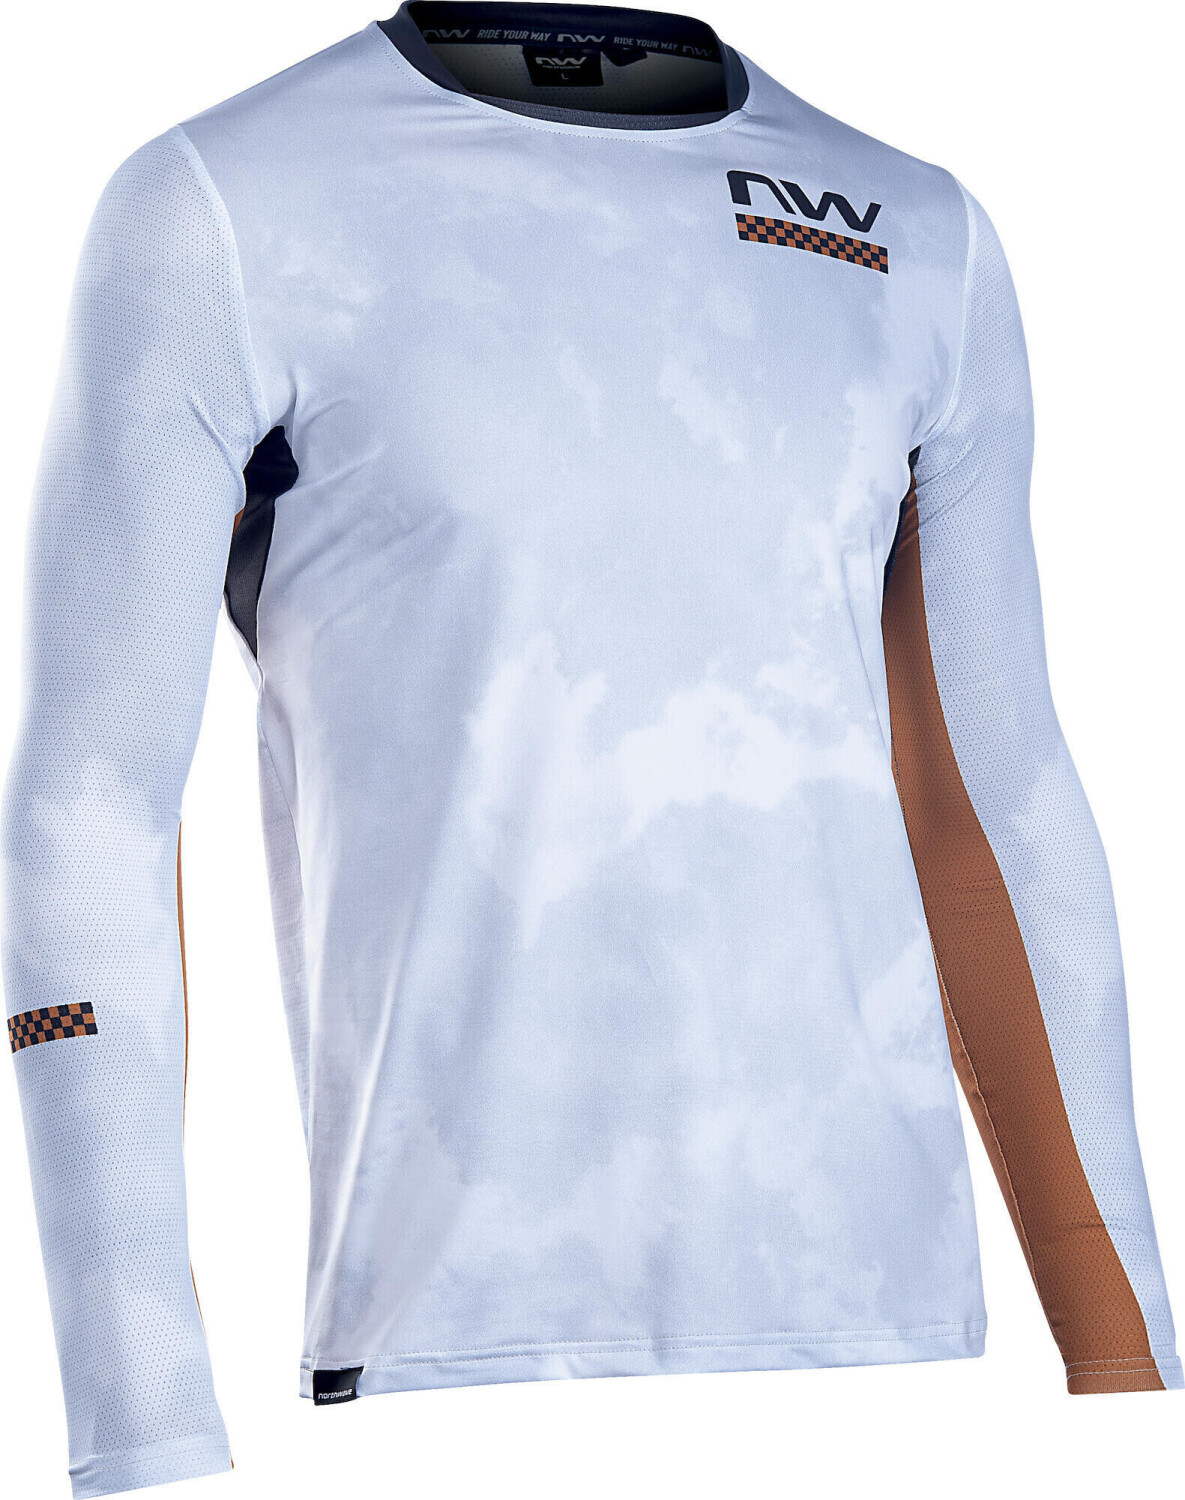 Photos - Cycling Clothing Northwave Bomb Jersey Long Sleeve white/gold 